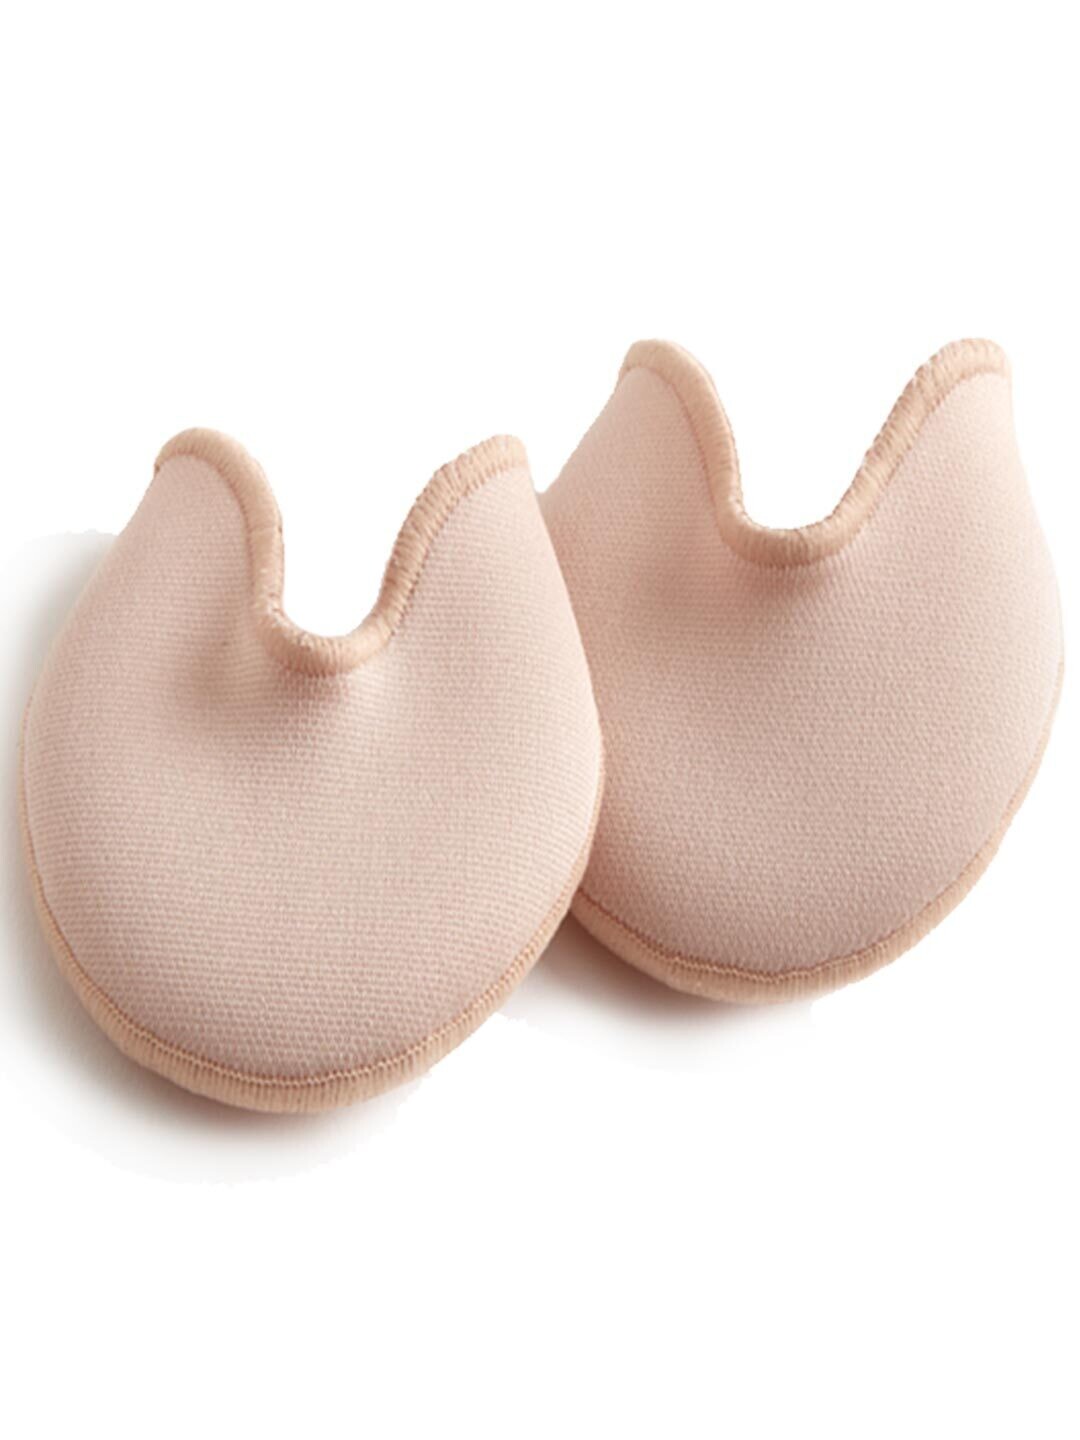 Bunheads Ouch Pouch Jr Toe Pad, Color: Nude, Size: Small